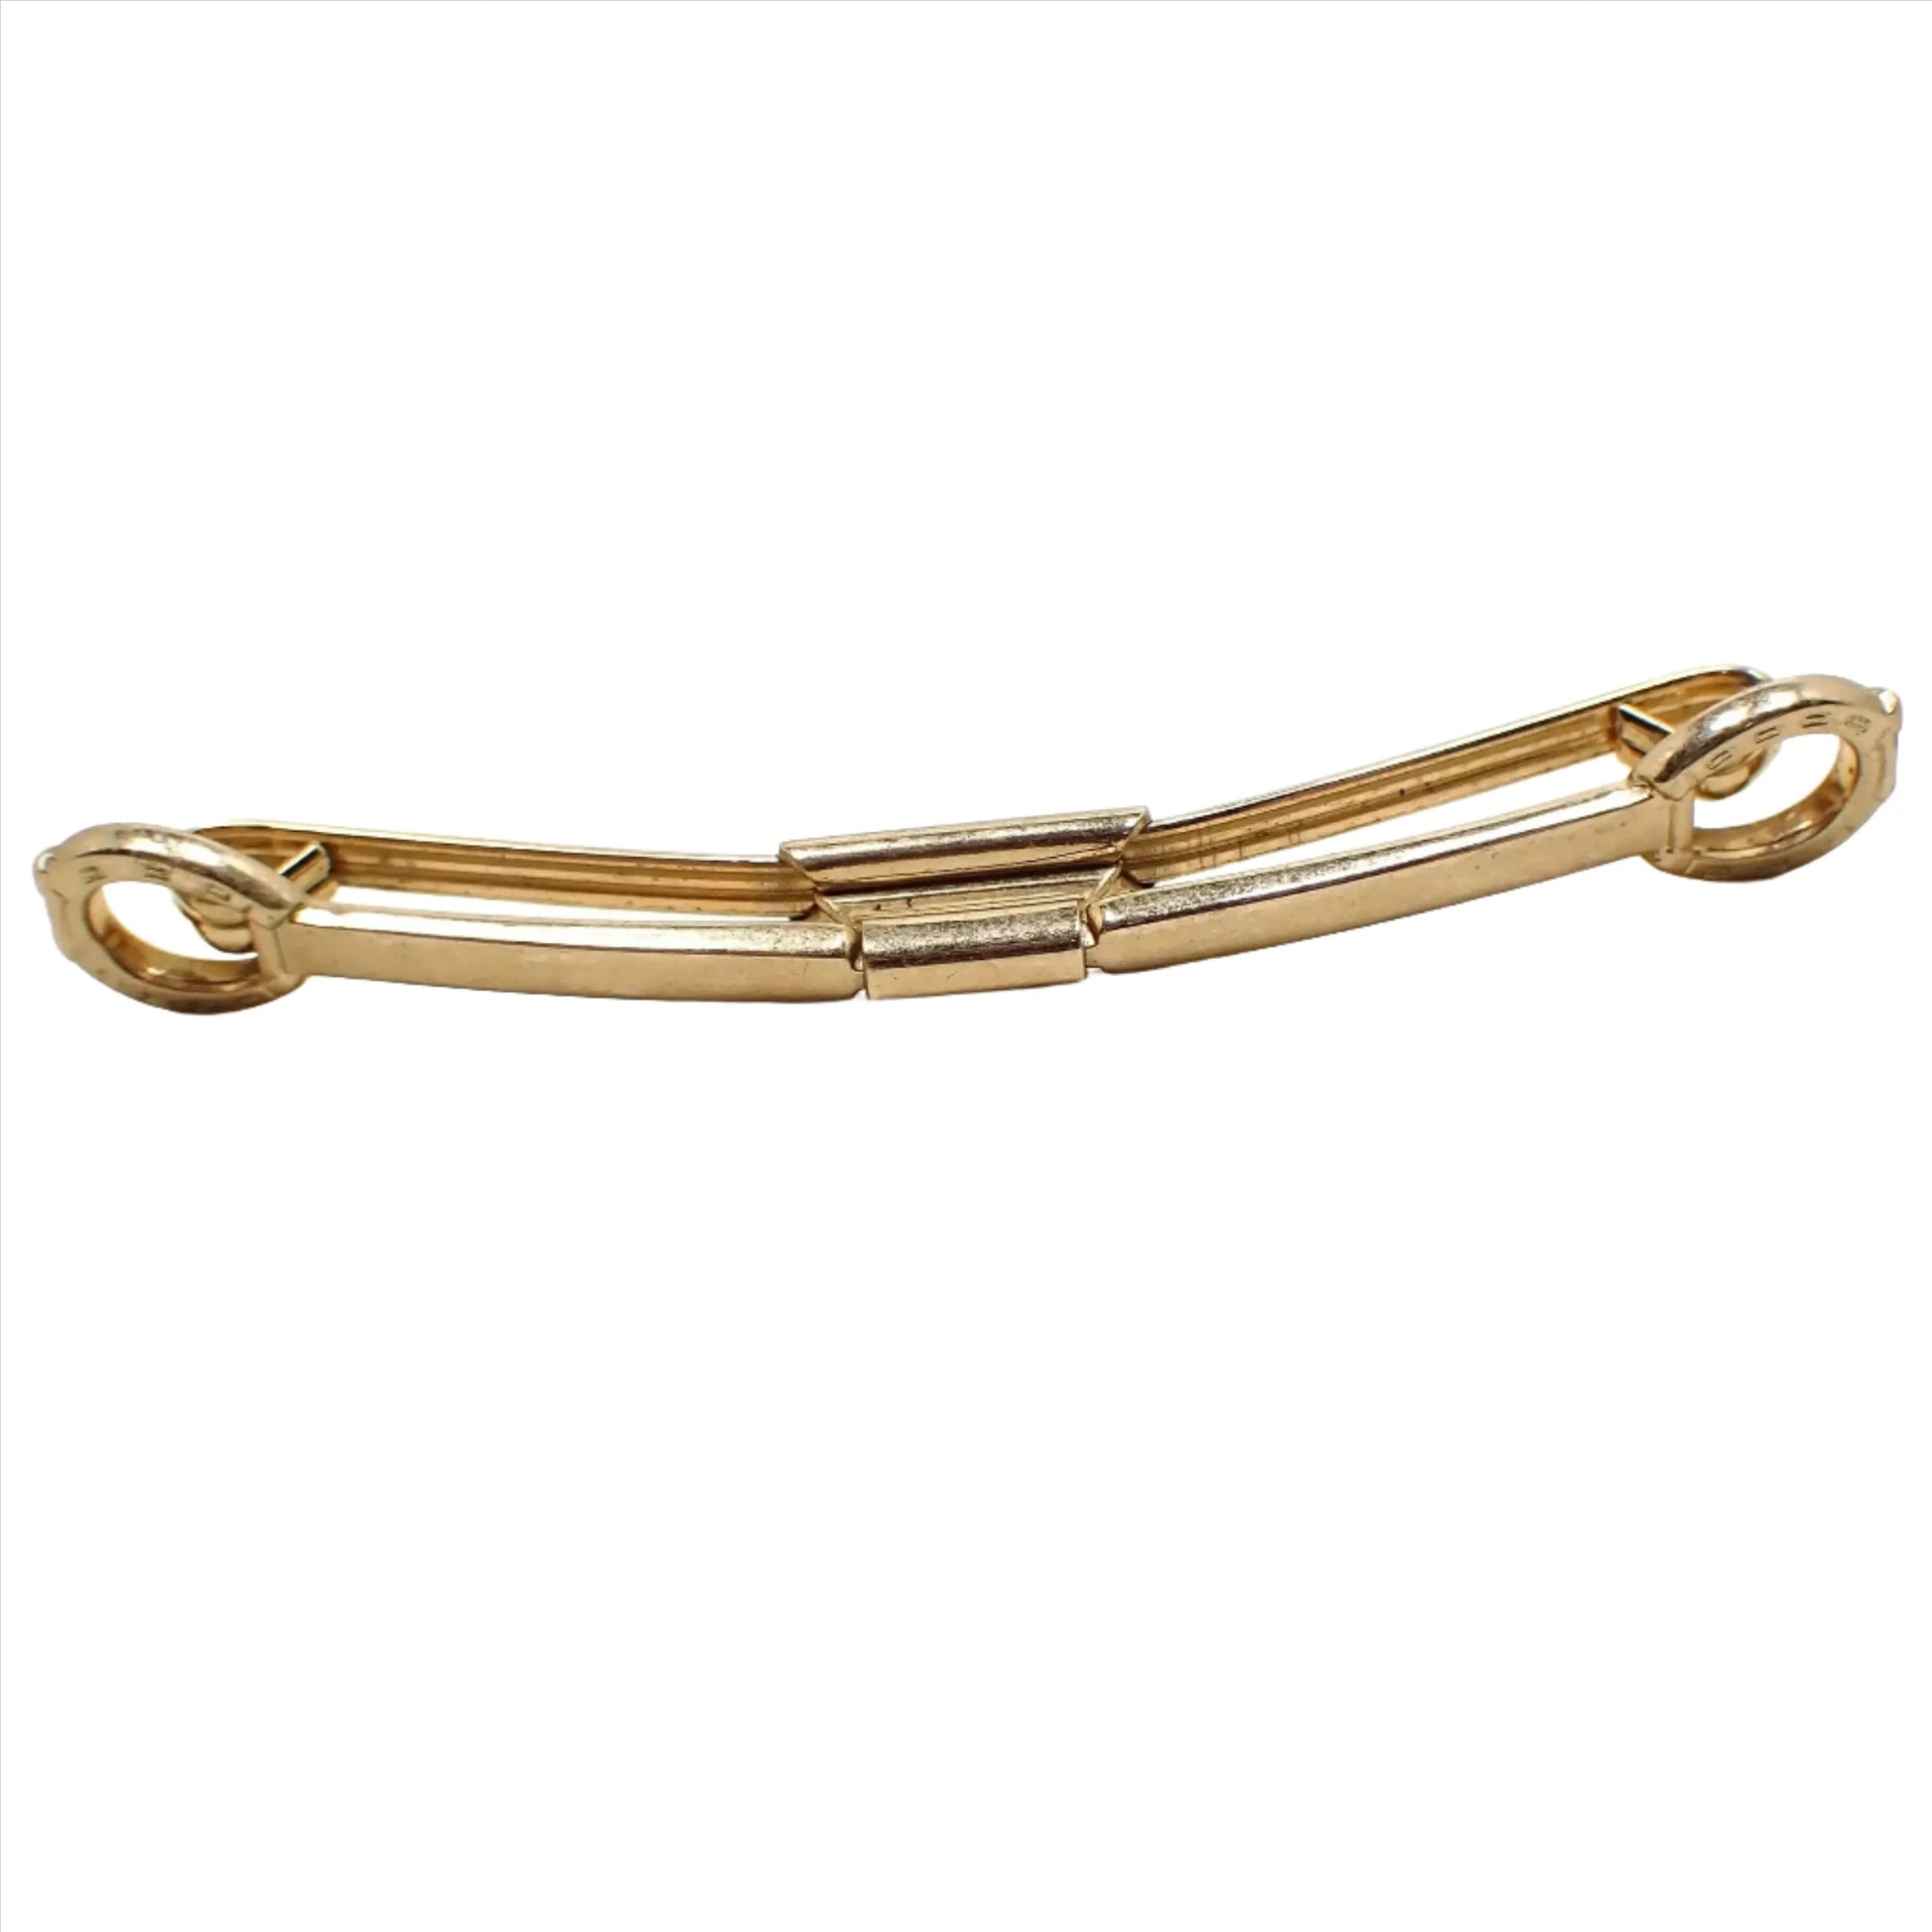 Enlarged front view of the Mid Century vintage Western style collar clip. It is gold tone plated in color and has a horseshoe shaped design on the ends.